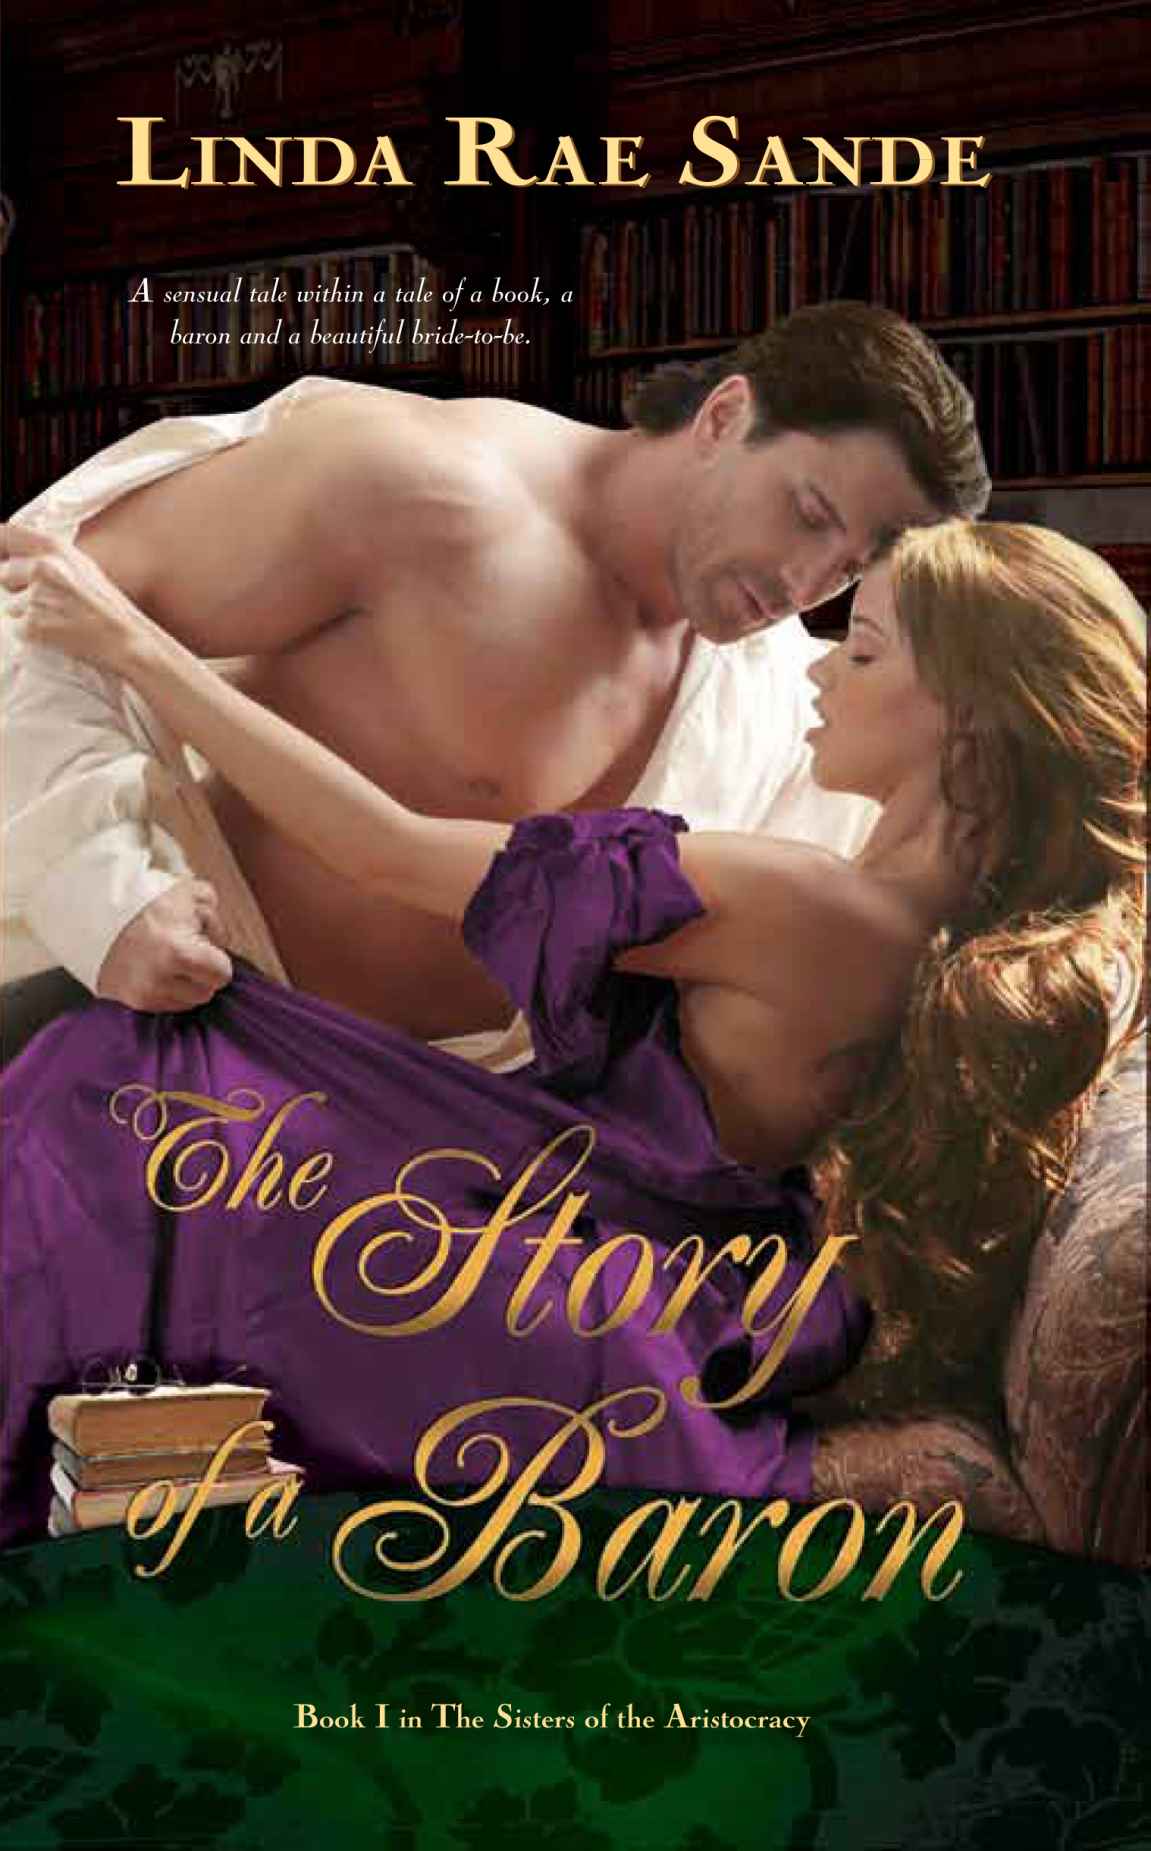 The Story of a Baron (The Sisters of the Aristocracy) by Linda Rae Sande